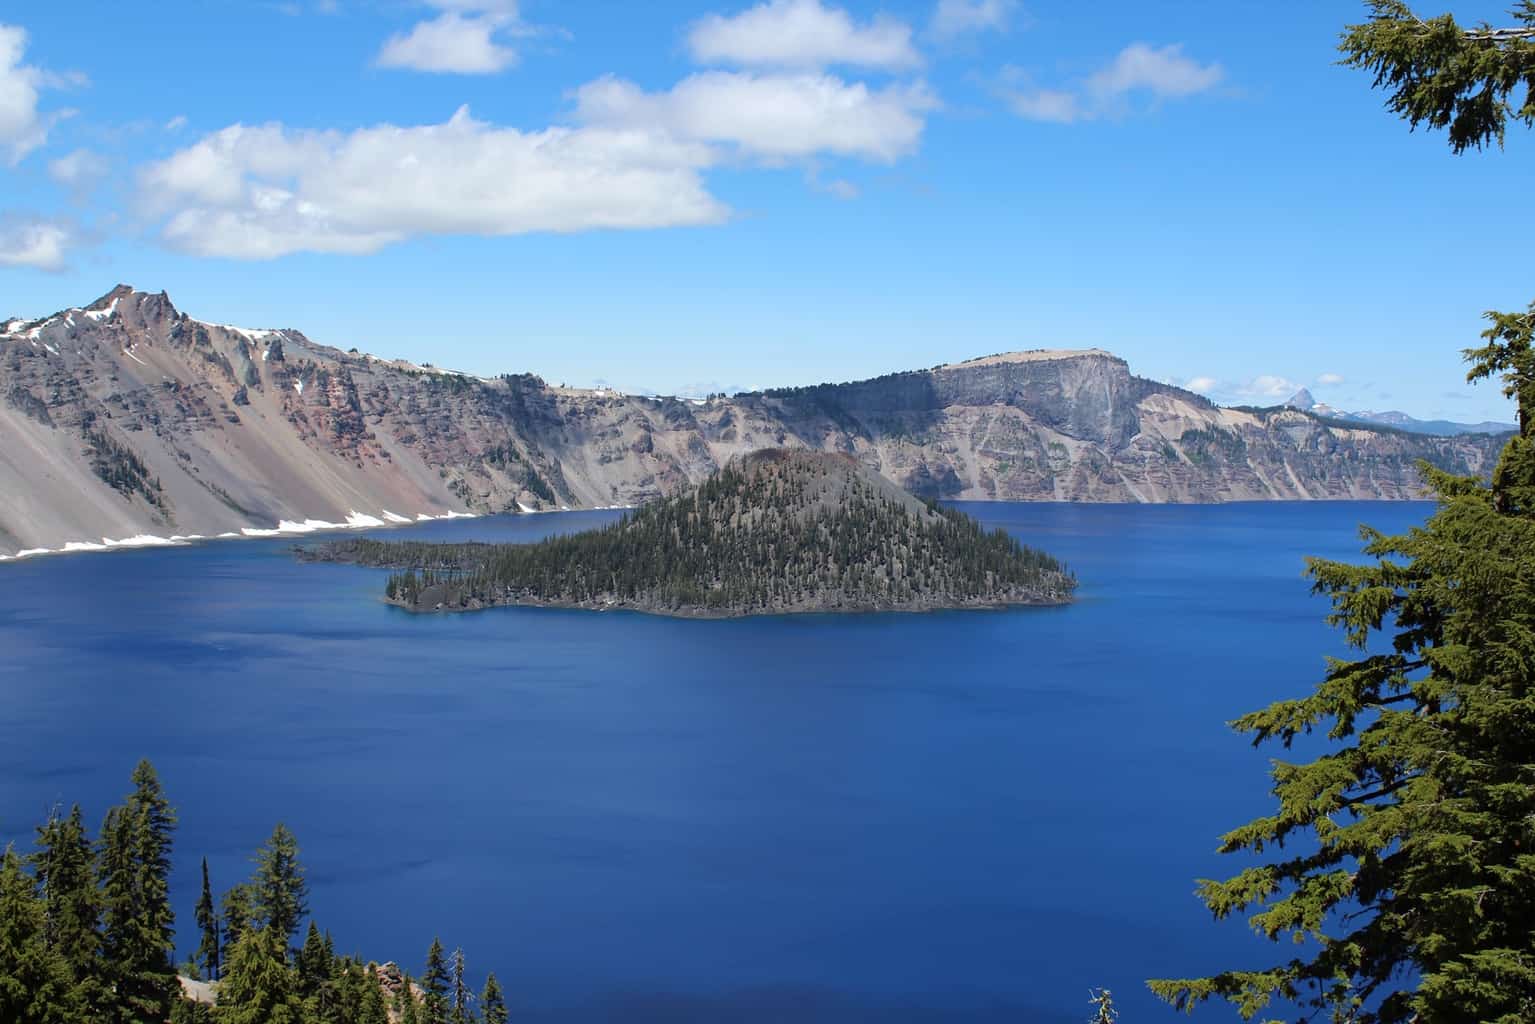 How Did Fish Get into Crater Lake